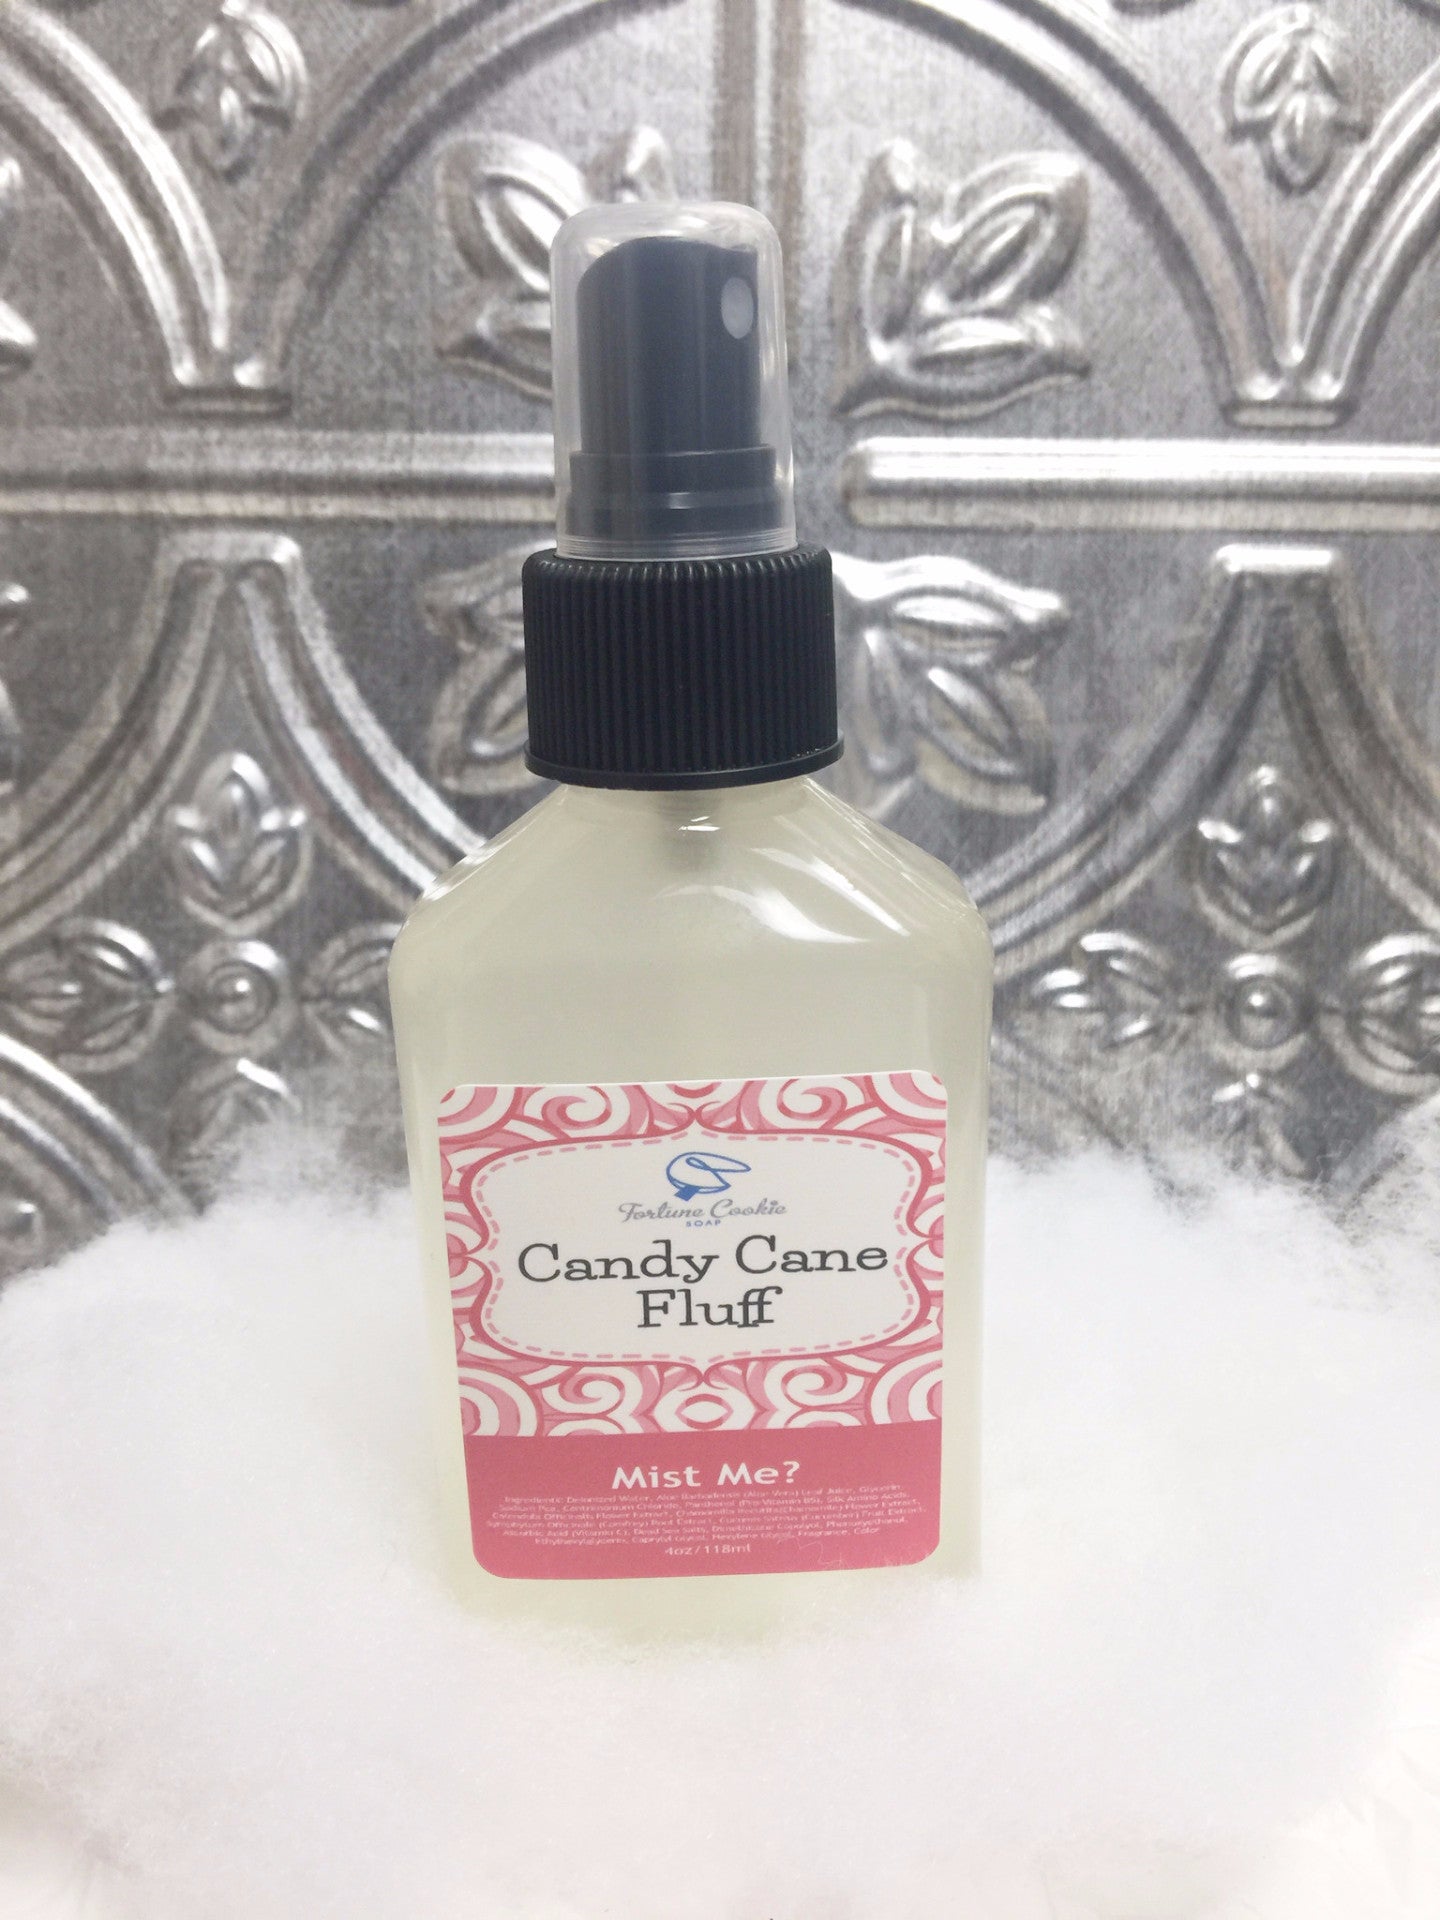 CANDY CANE FLUFF Mist Me? - Fortune Cookie Soap